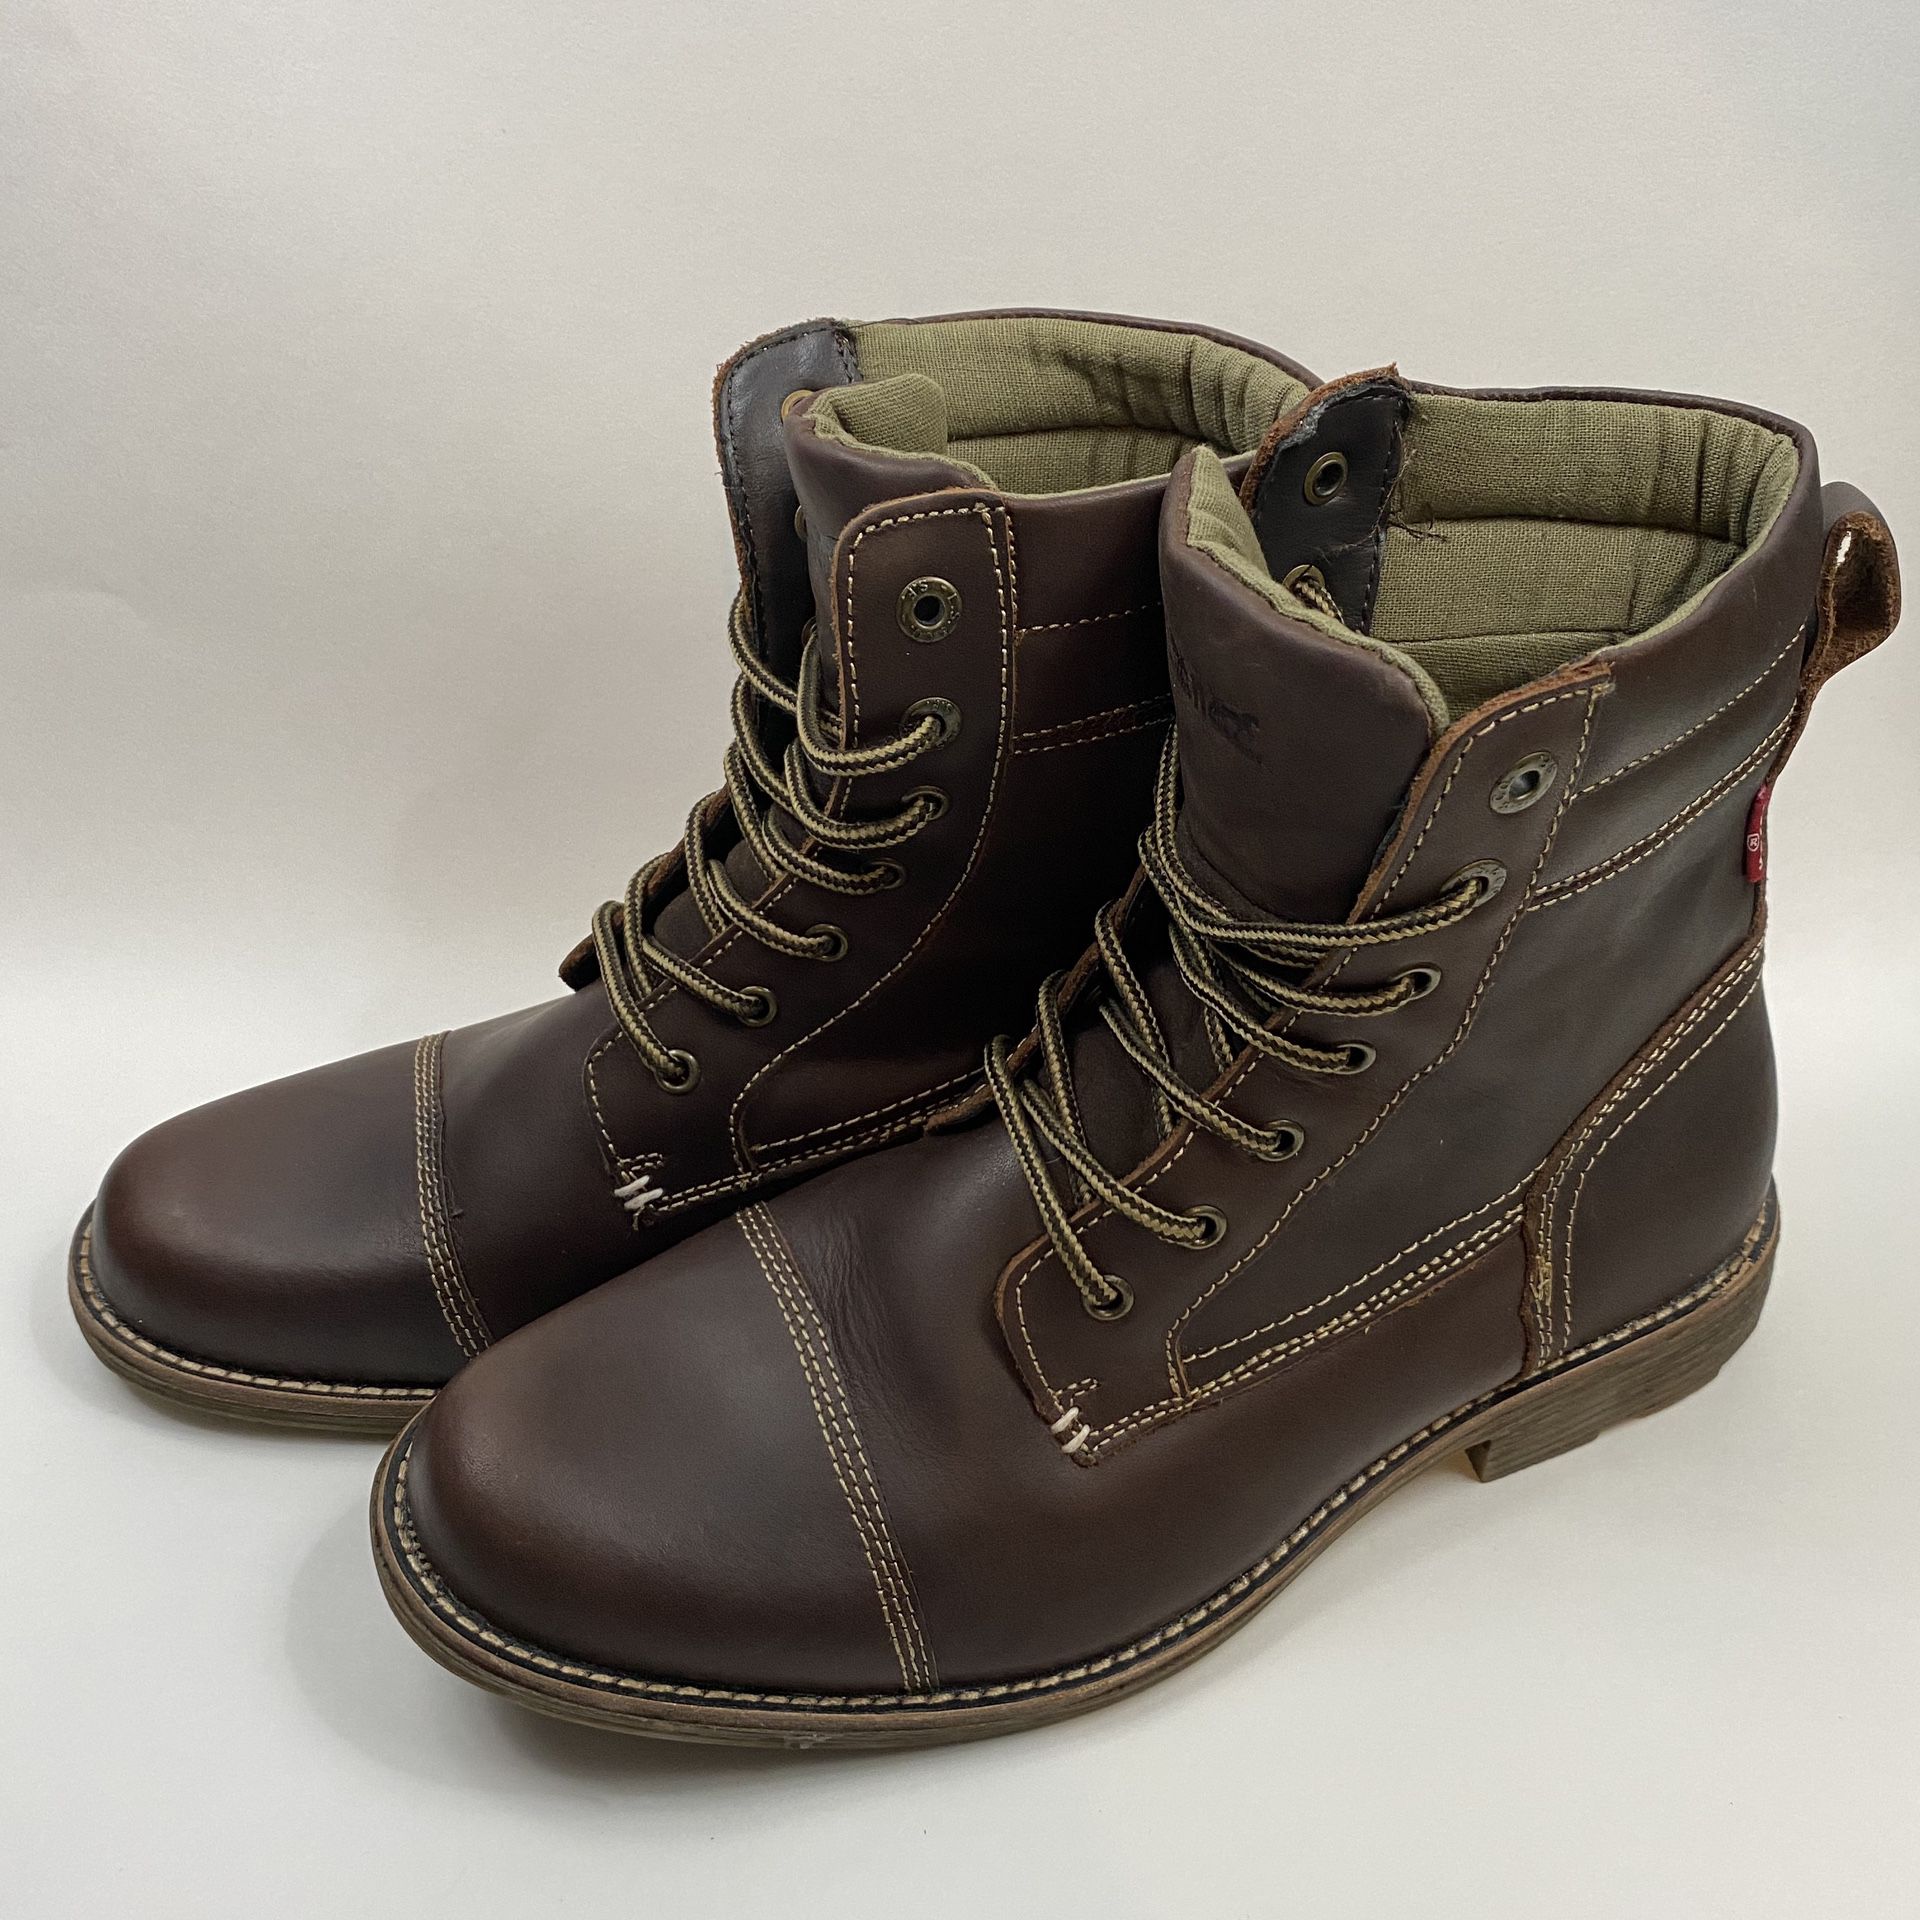 Levi's Men's Brown Leather High Top Boots - Size 10.5 Men